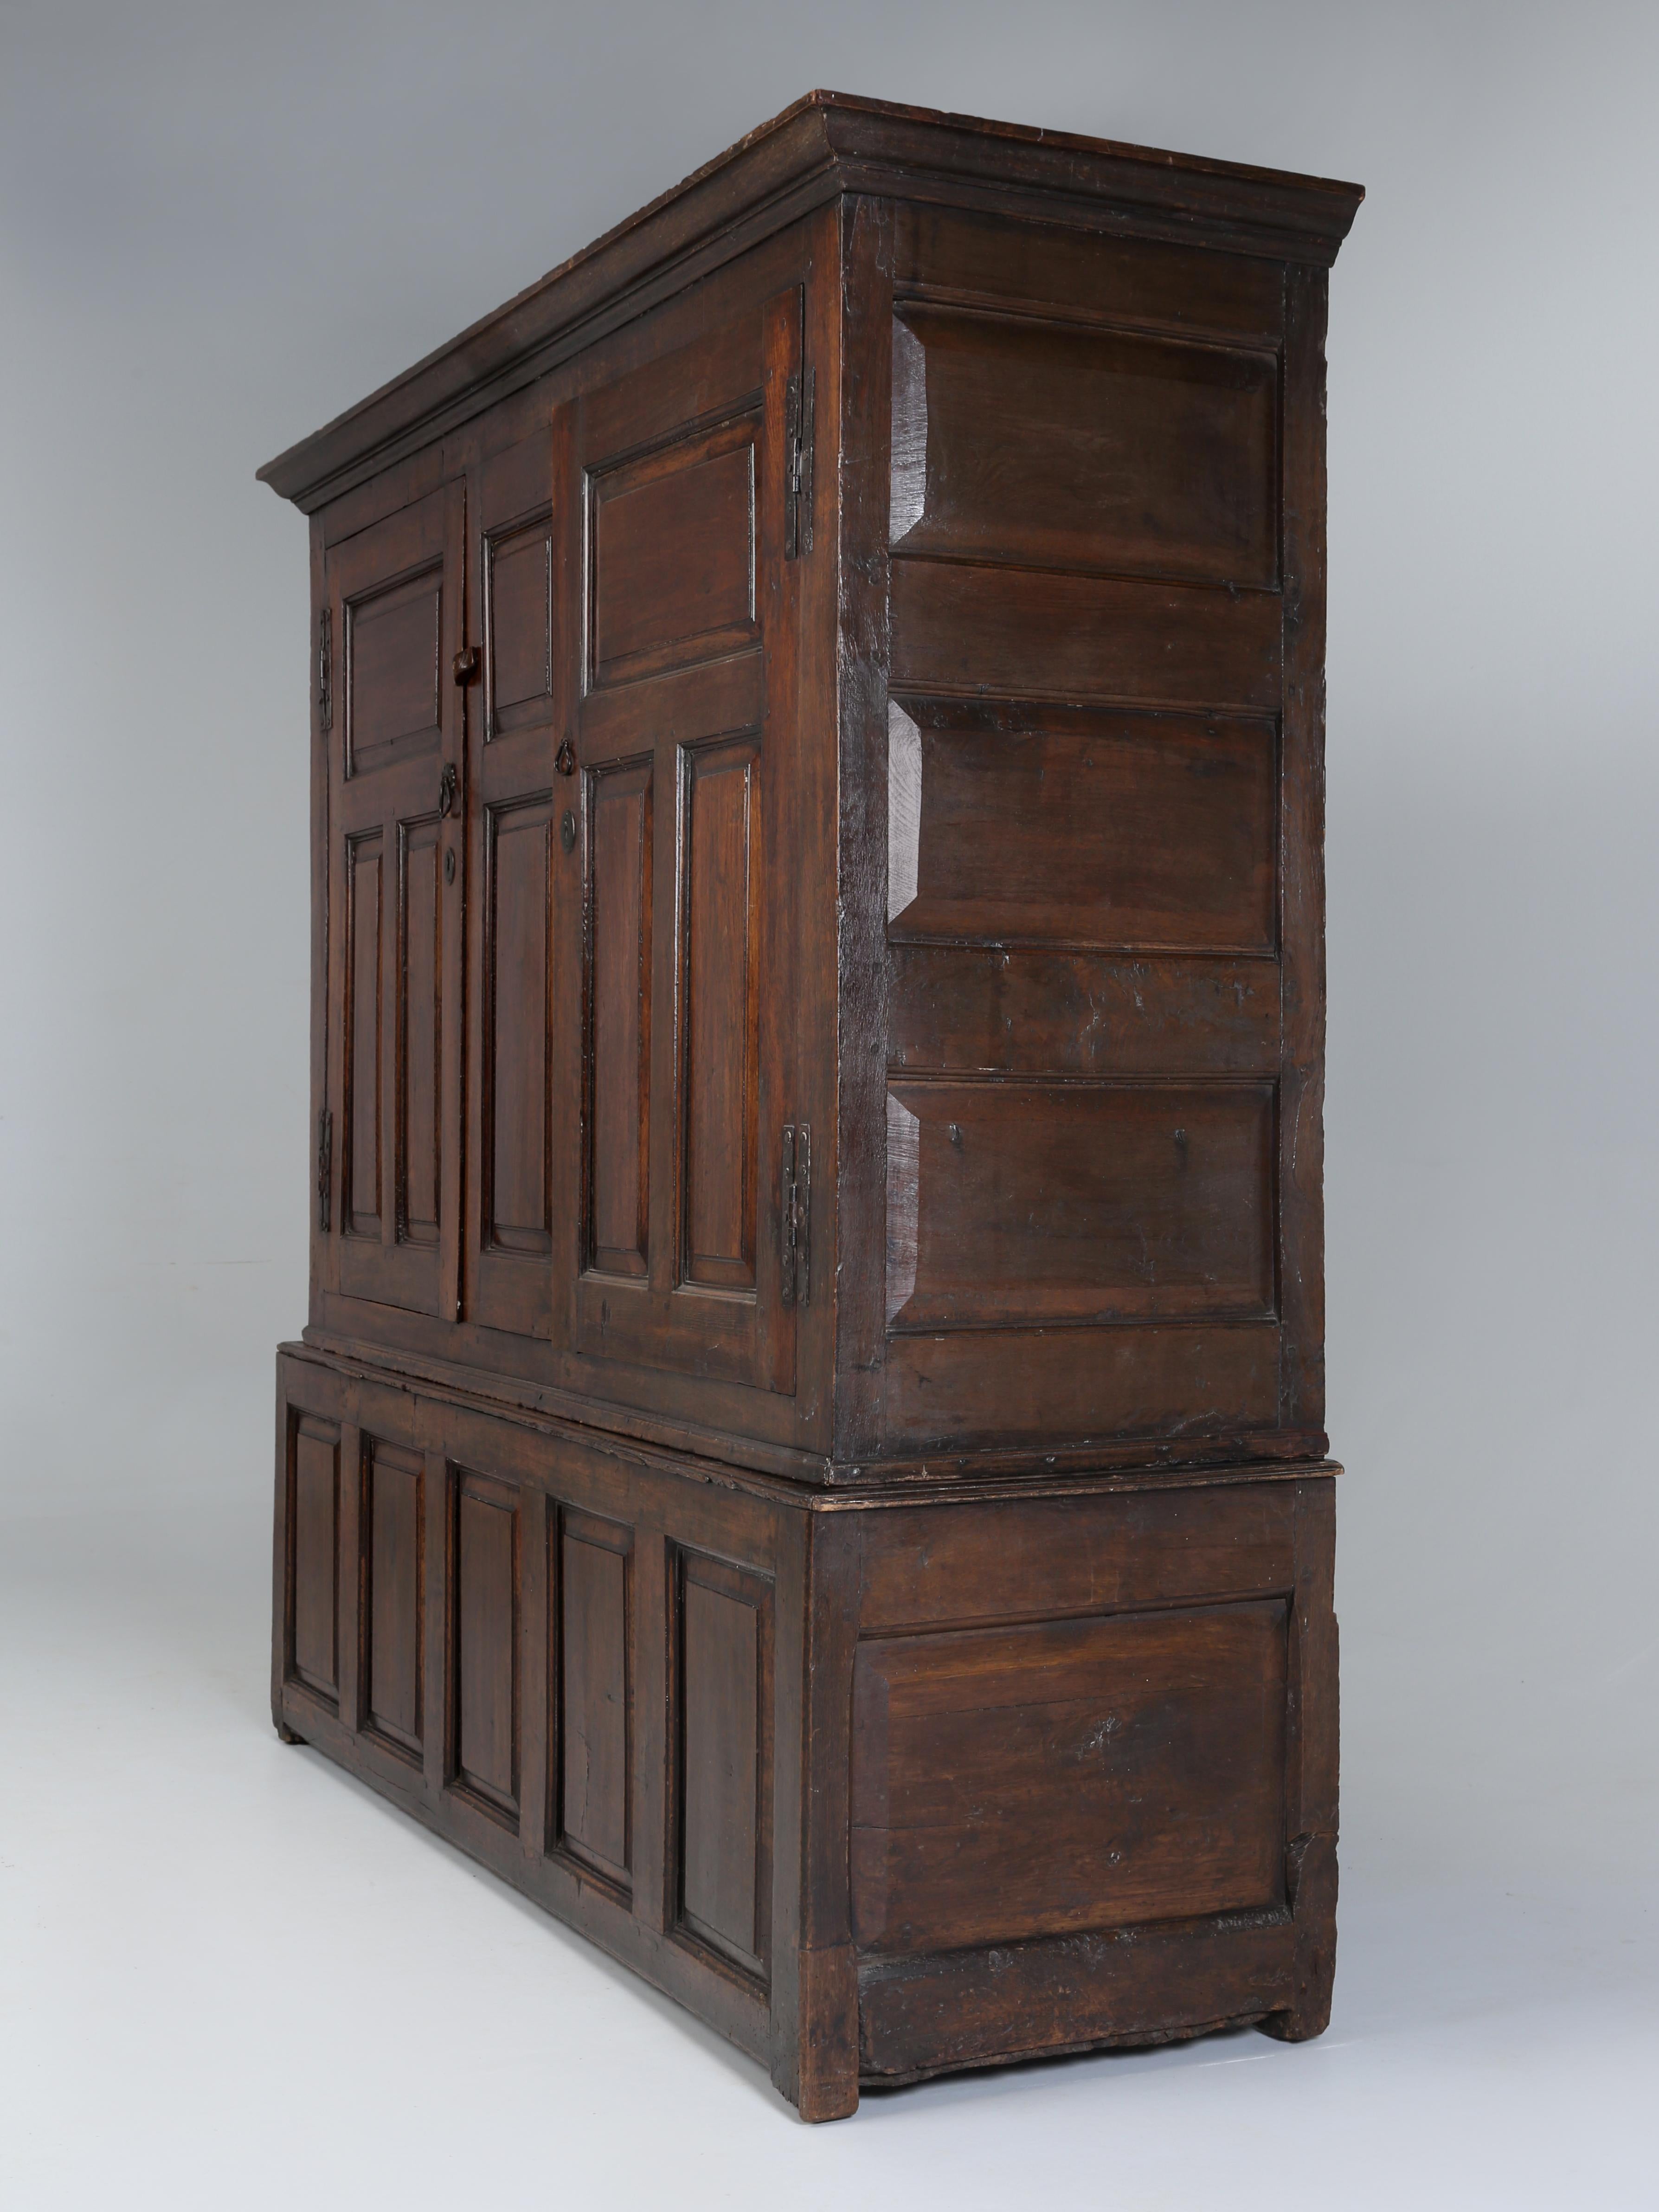 Antique English Oak Baker’s Cupboard with two moulded panel doors from the early 1700’s and appears to be completely unrestored and unbelievably does not require restoration. The last owner used the Antique English Baker’s Cupboard as a Hall Coat